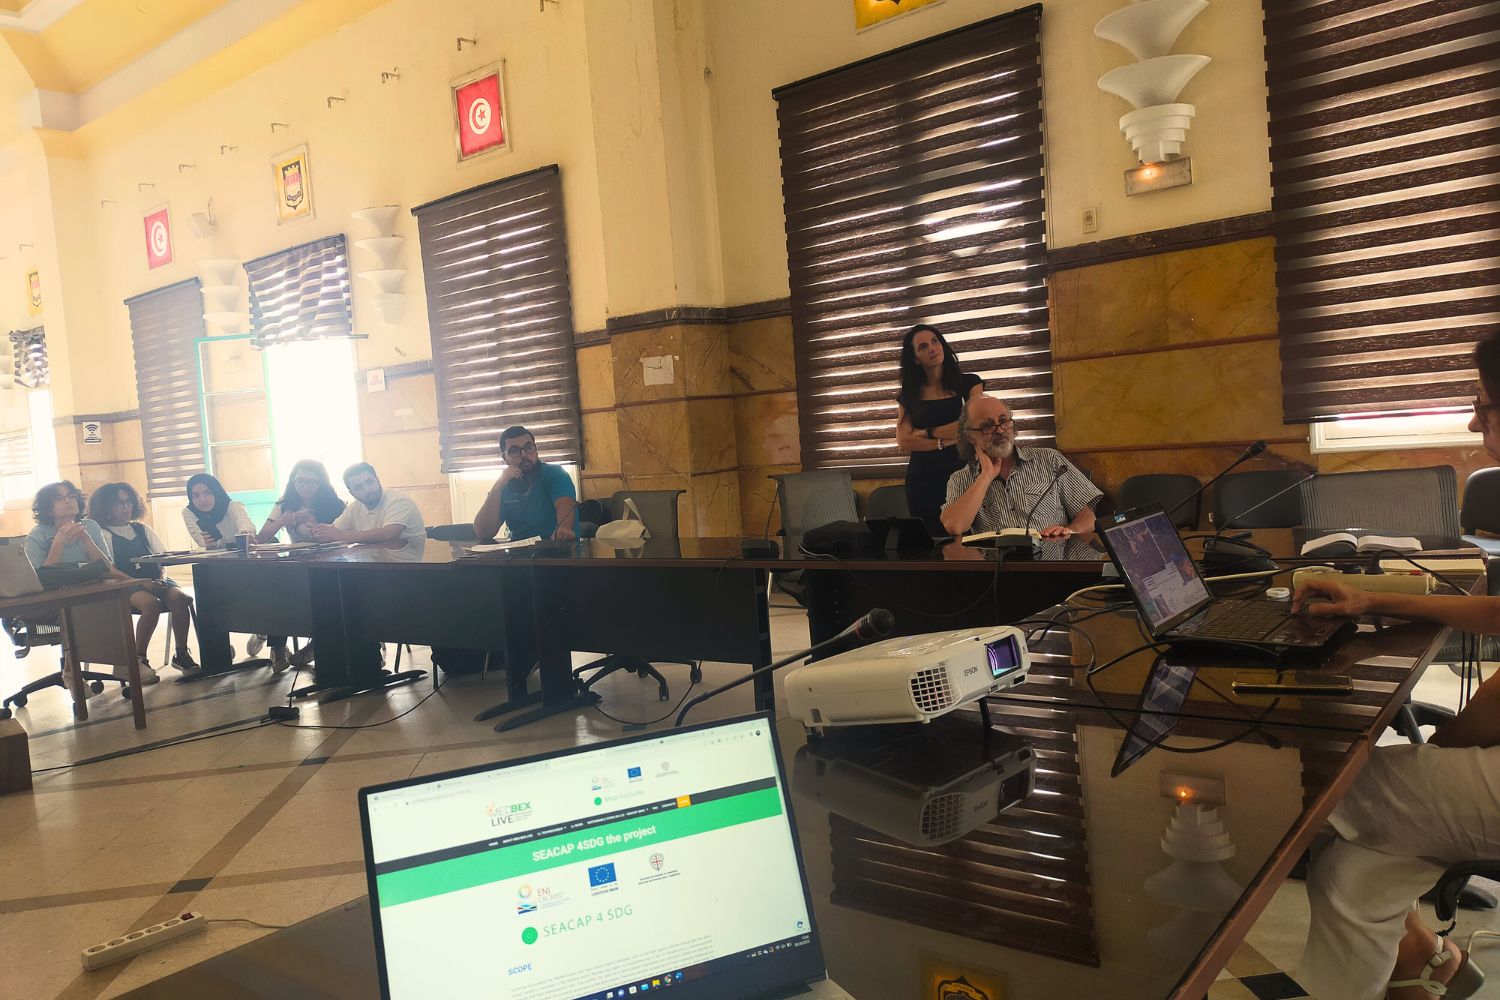 [SEACAP4SDG] MEDREC organized a co-creation workshop to select the energy renovation measures to implement in Tunisia